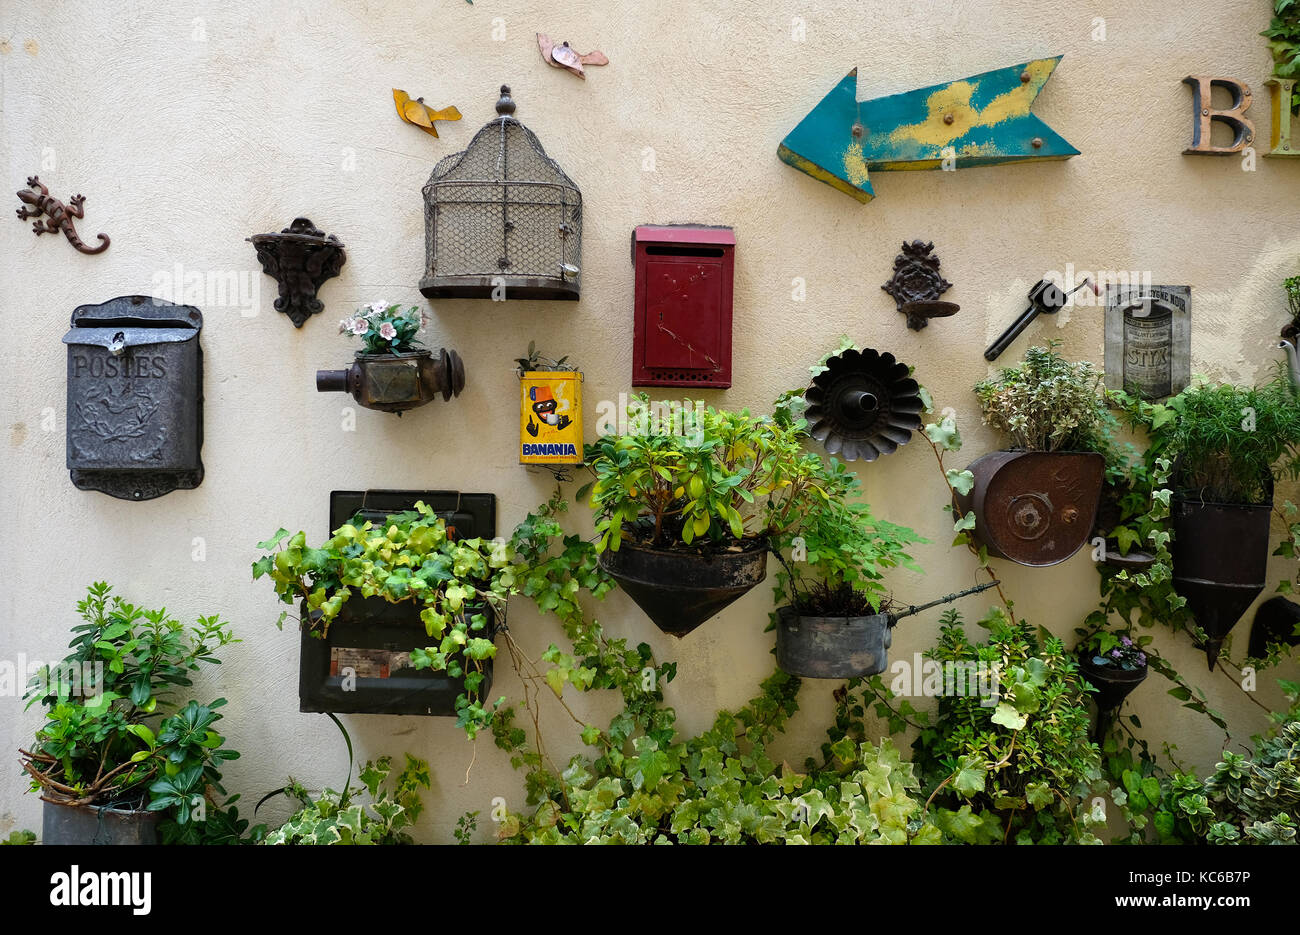 Display of plants in pots in Saint-Rémy de Provence, Provence, France Stock Photo